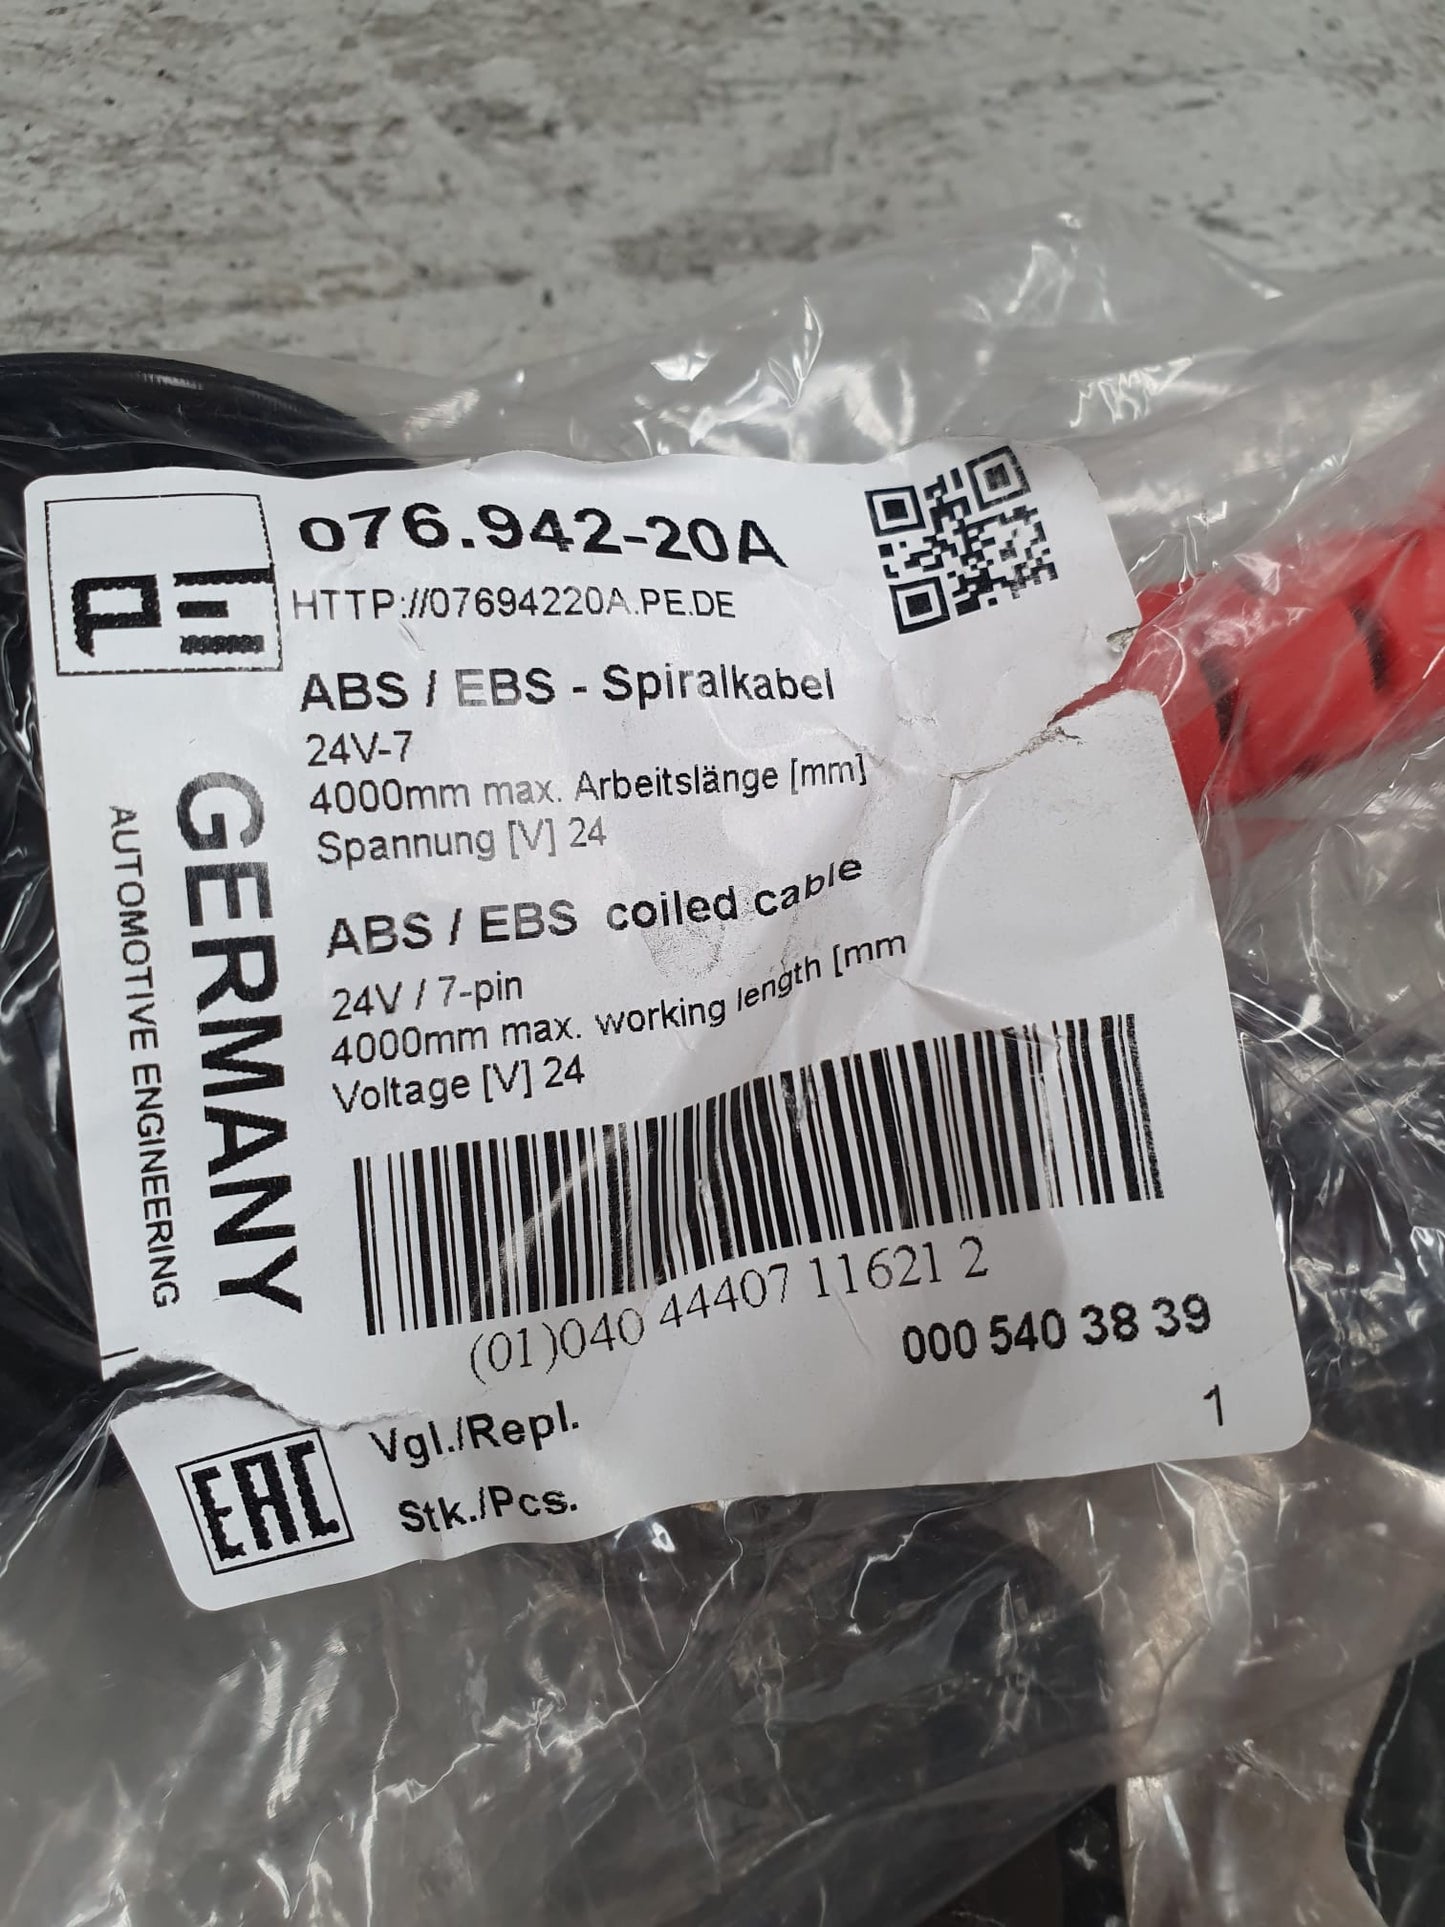 ABS/EBS Cable 24 V 7-pin 076.942-20A Cavo rimorchio camion